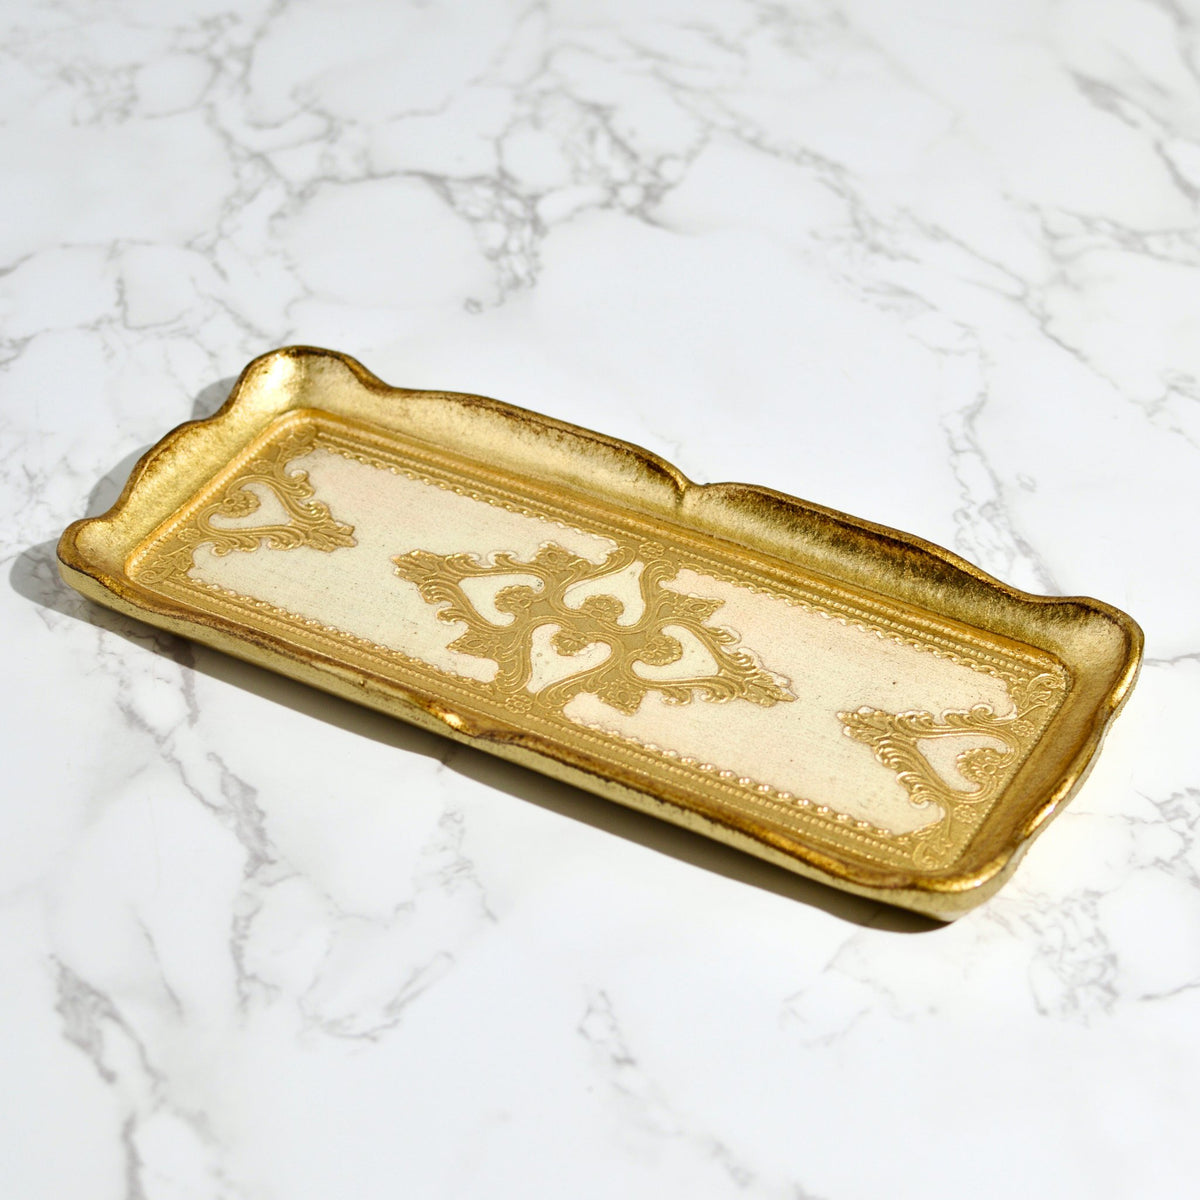 Florentine Carved Gilded Wood Narrow Tray, Made in Italy - My Italian Decor